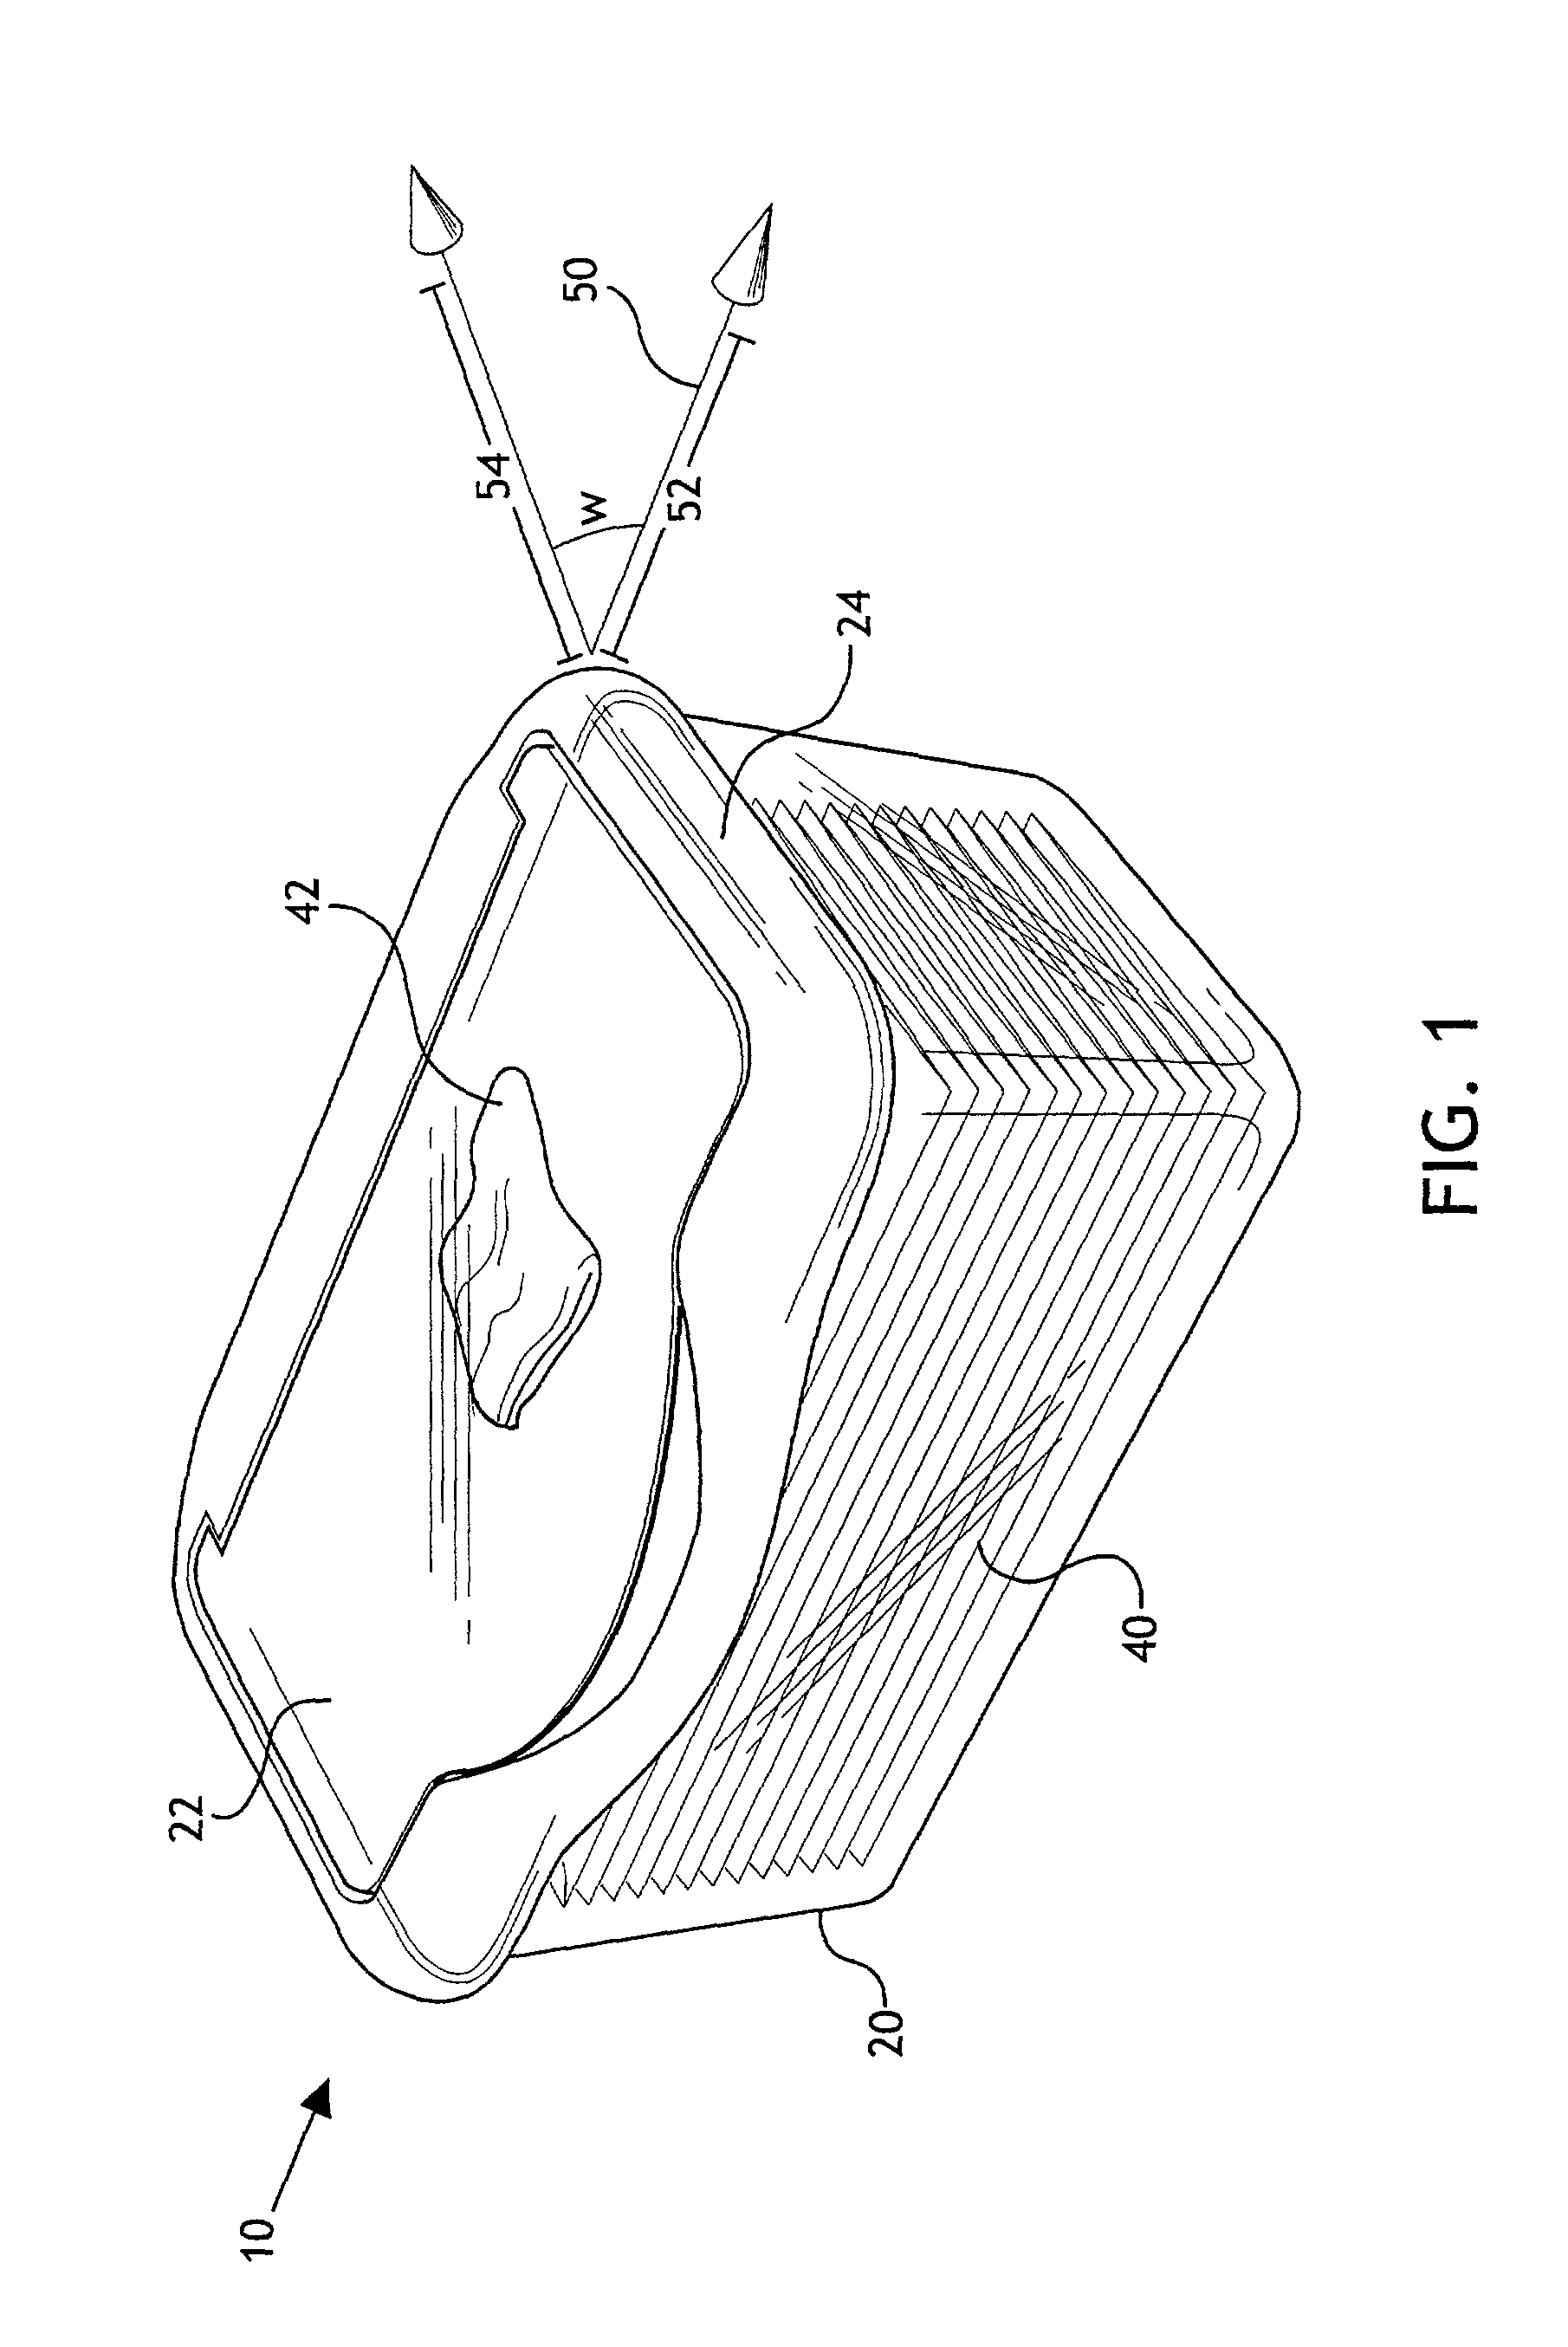 Package and method for storing and dispensing wet wipes in a pop-up format